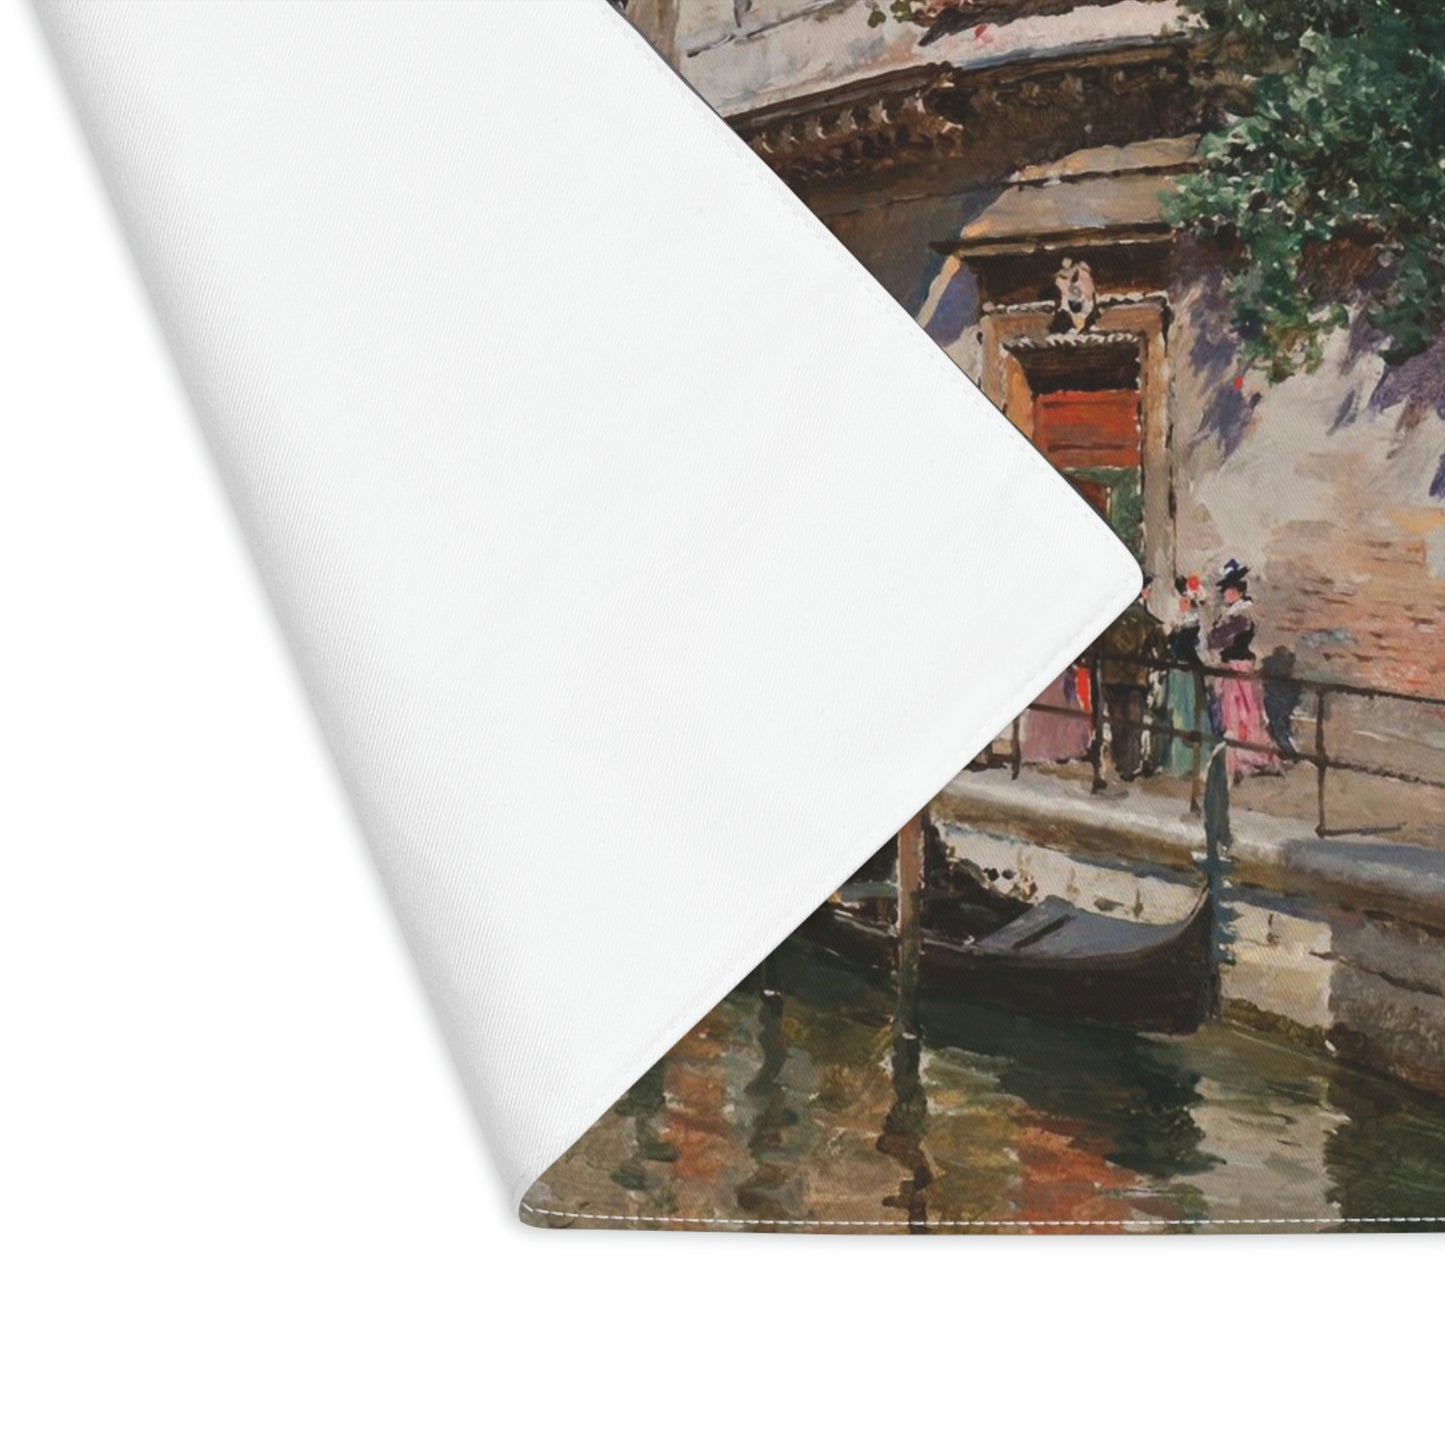 Federico del Campo: "Along the Canal" - Placemat, 1pc